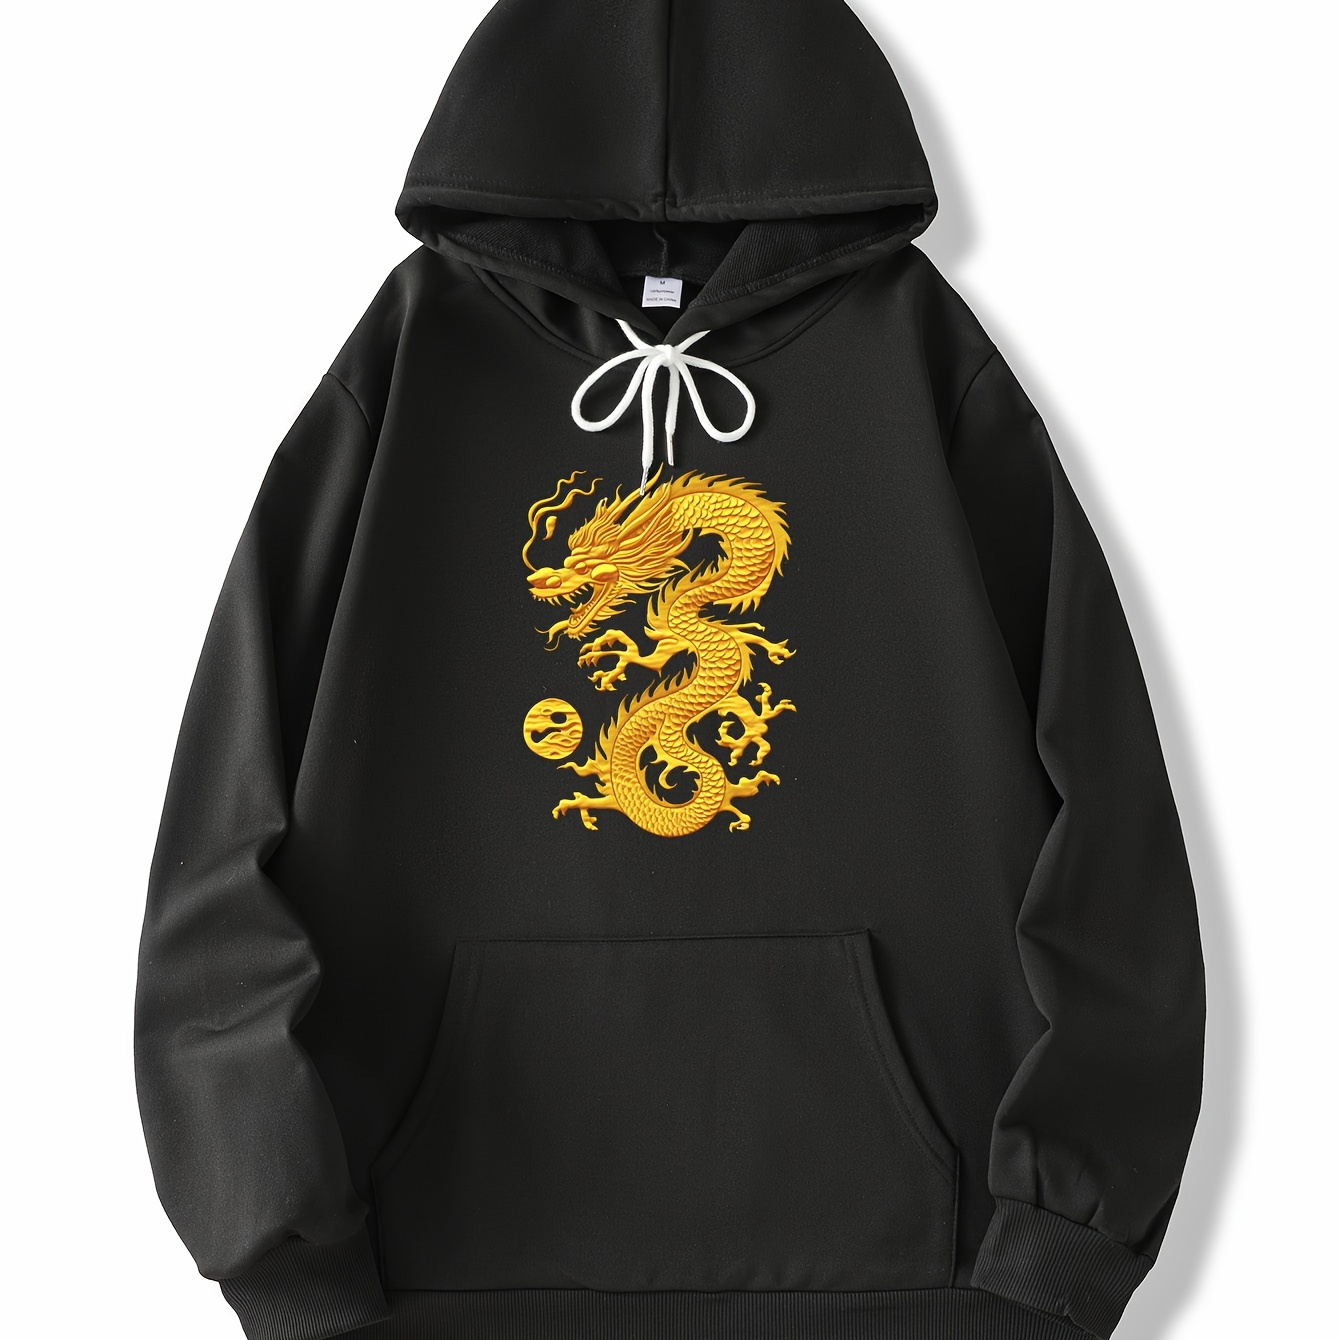 

Dragon Pattern Print Hooded Sweatshirt, Fancy Hoodies Fashion Casual Tops For Spring Autumn, Men's Clothing